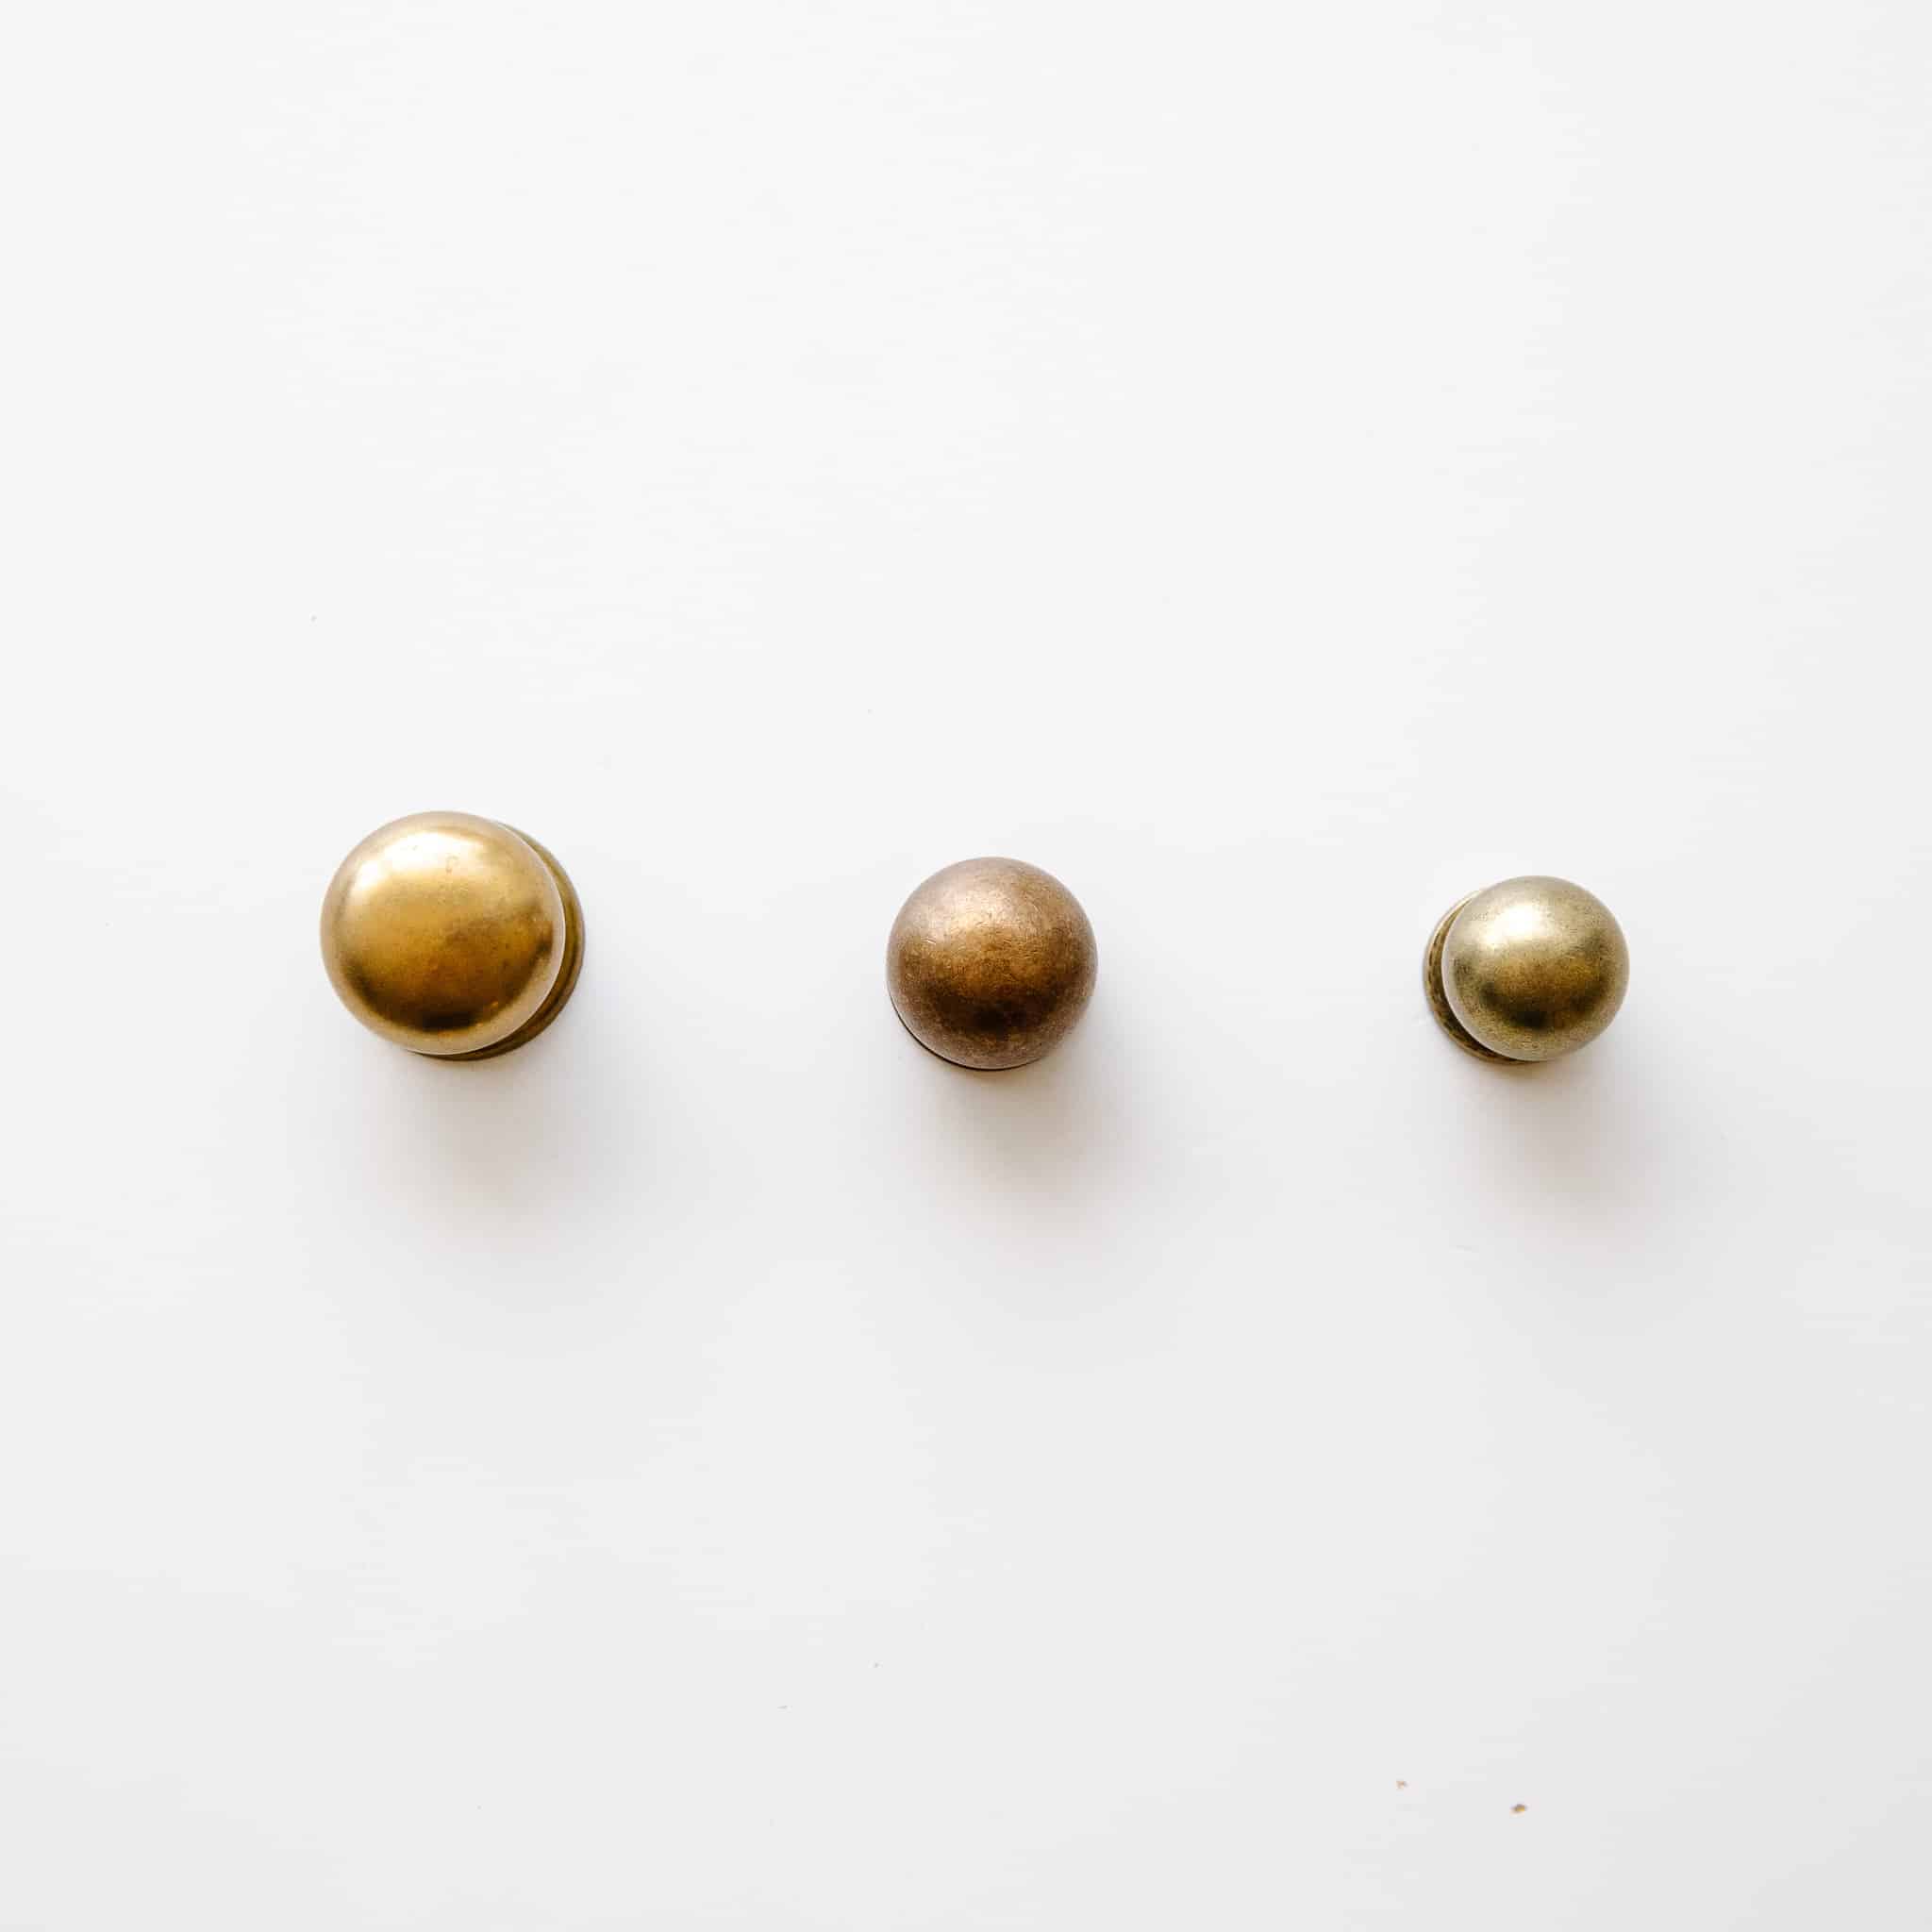 Testing 15 Brass Cabinet Knobs to Find The Best!